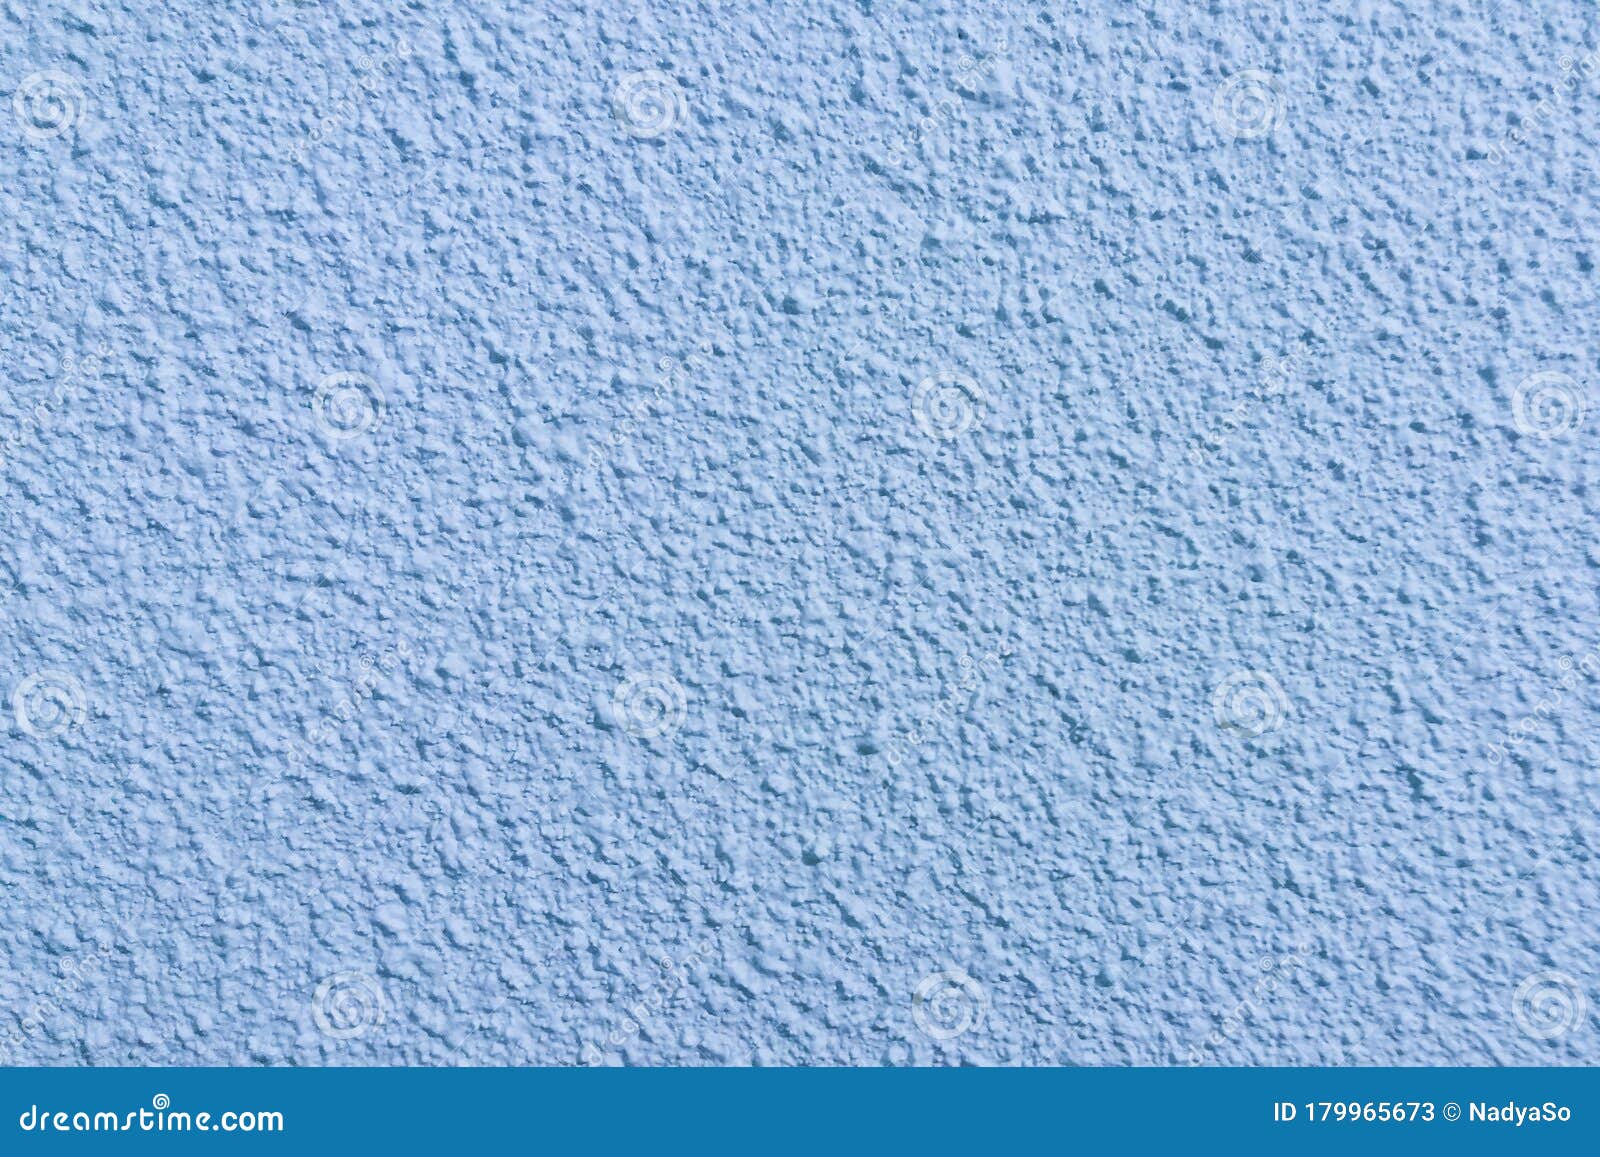 Blue Rough Wall Textured Background Stock Image - Image of paper